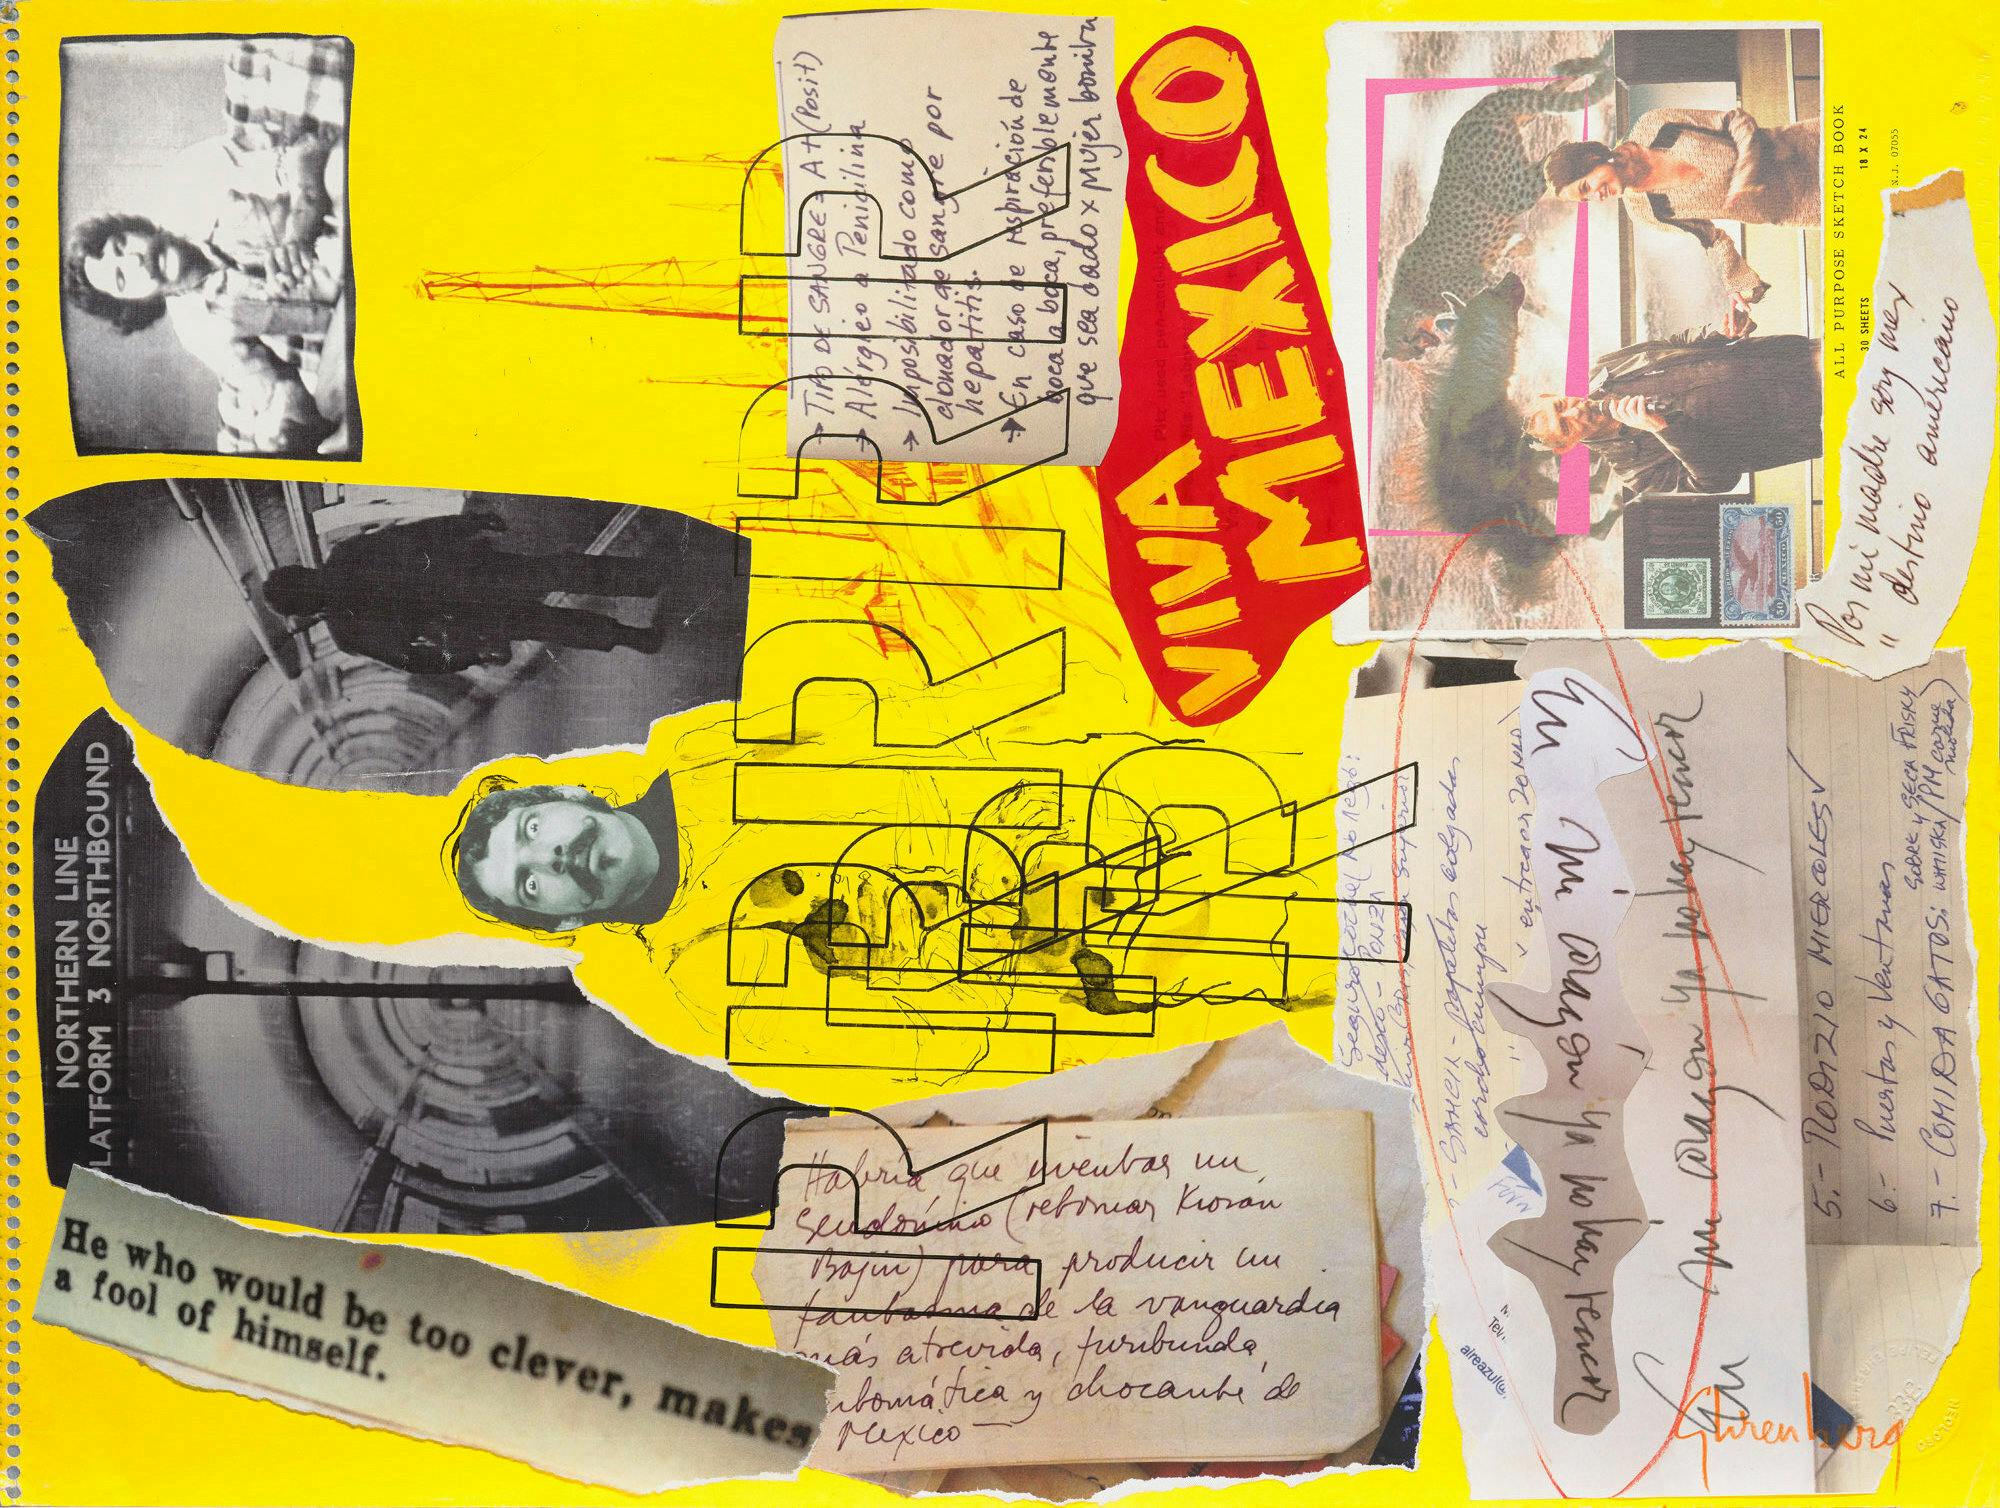 A collage showing fragments of news clippings and photos, overlaid with handwritten and stenciled text.